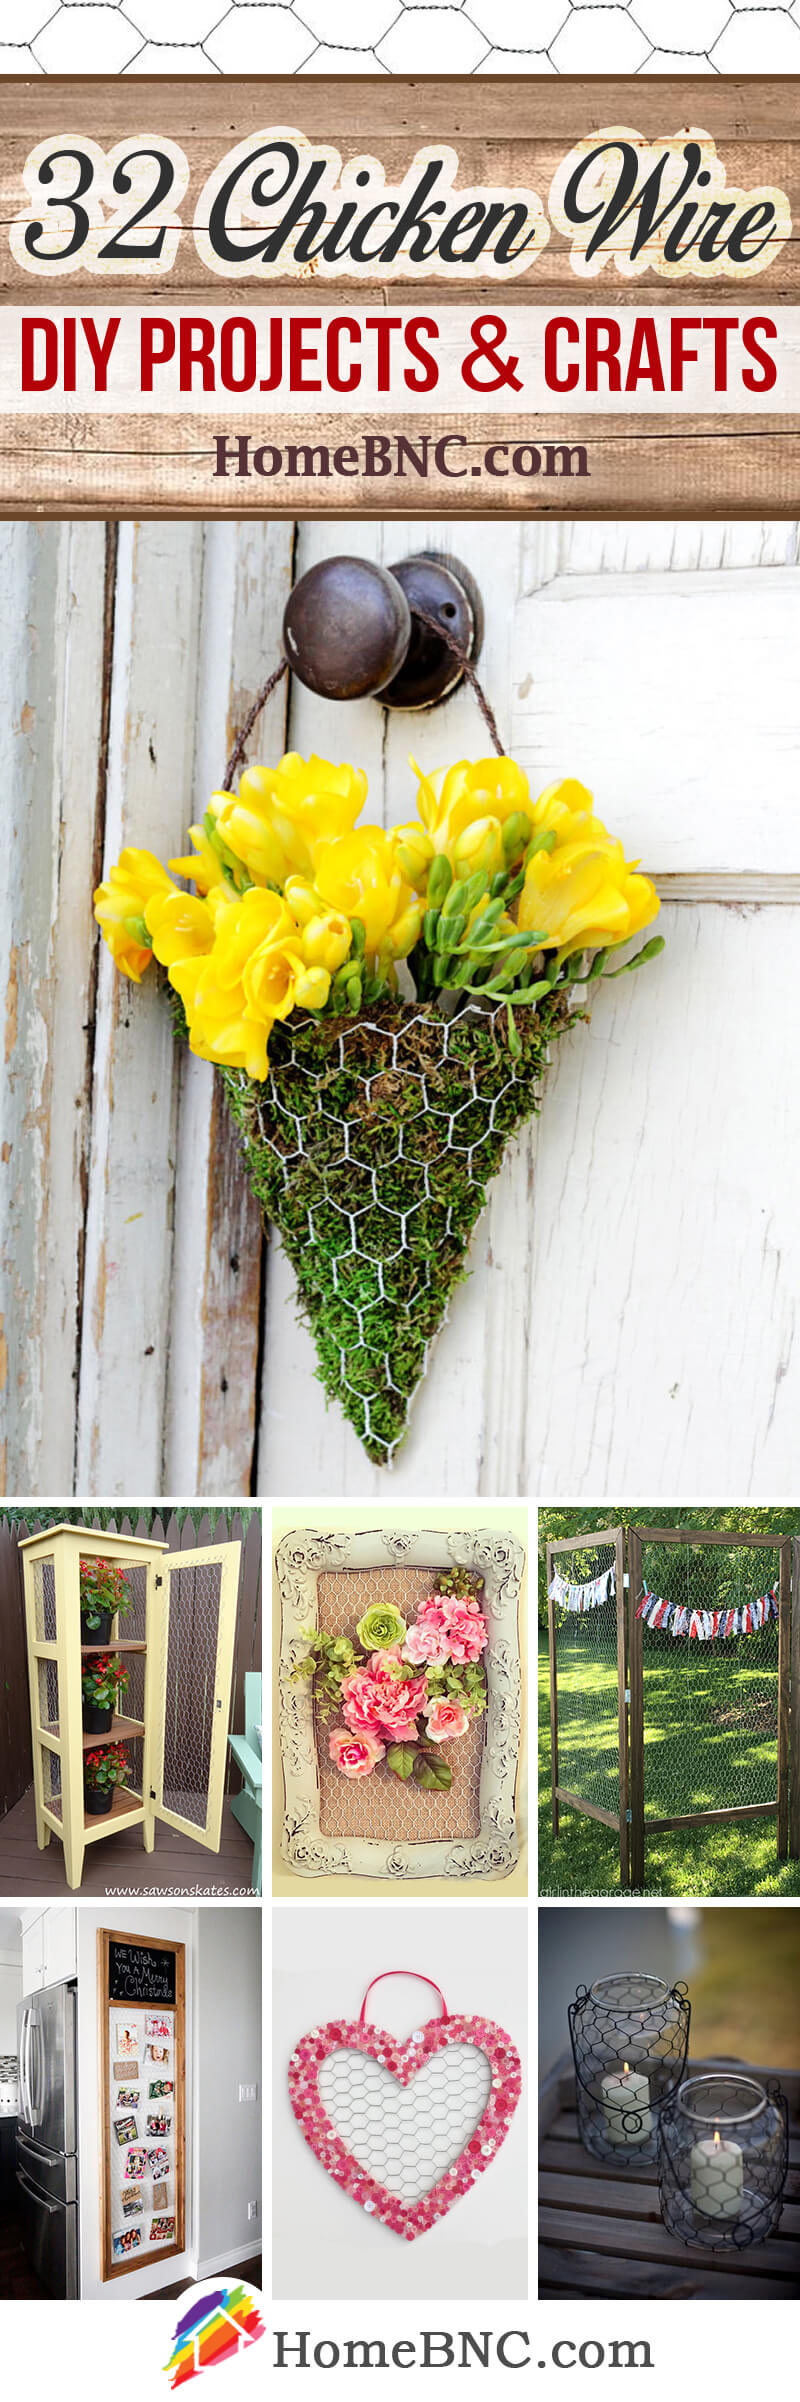 Chicken Wire DIY Projects